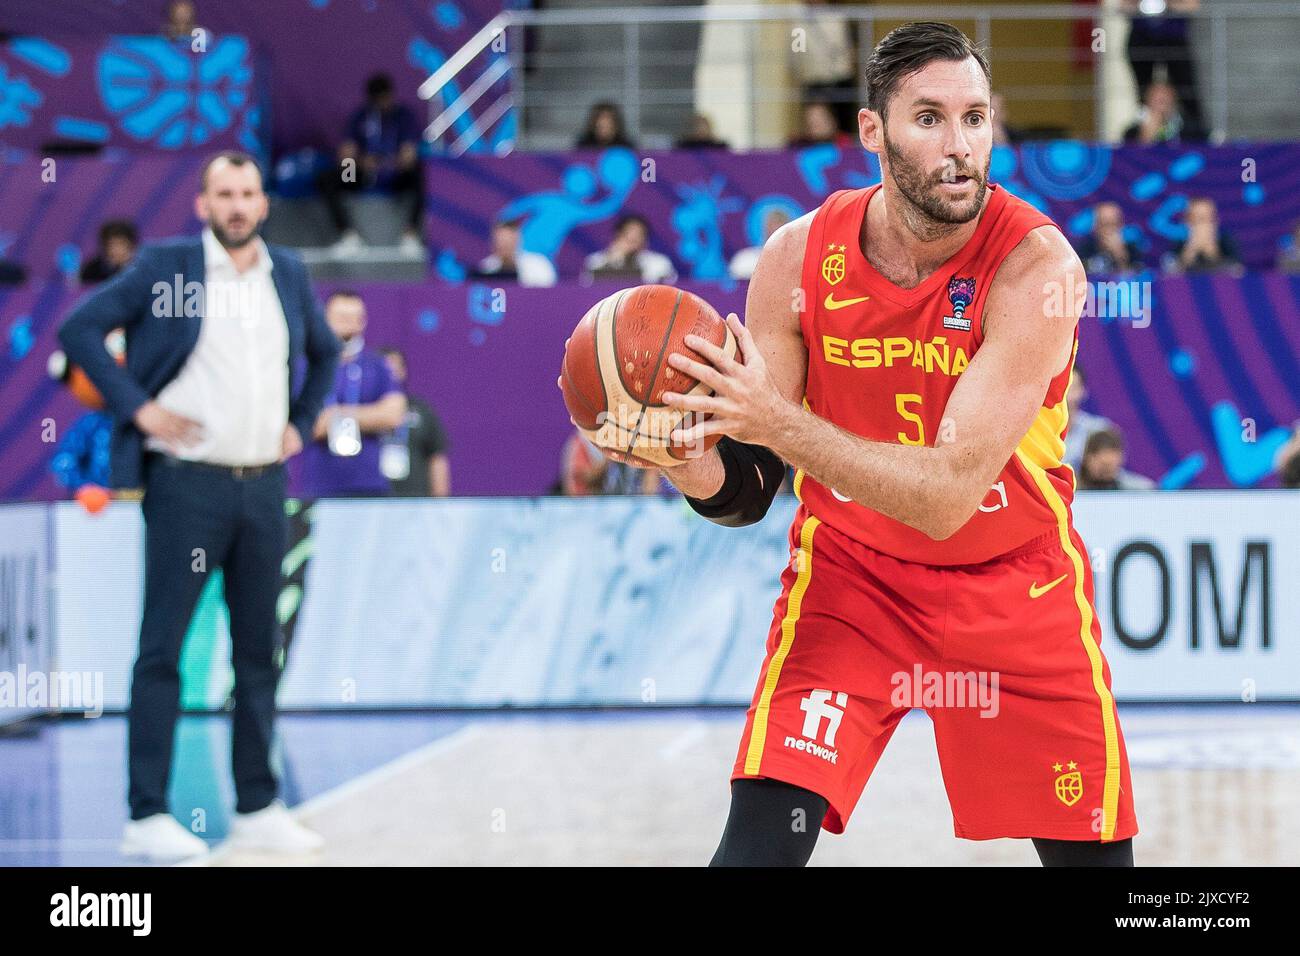 Tbilisi, Georgia, 6th September 2022. Rodolfo Fernandez of Spain in action during the FIBA EuroBasket 2022 group A match between Montenegro and Spain at Tbilisi Arena in Tbilisi, Georgia. September 6, 2022. Credit: Nikola Krstic/Alamy Stock Photo